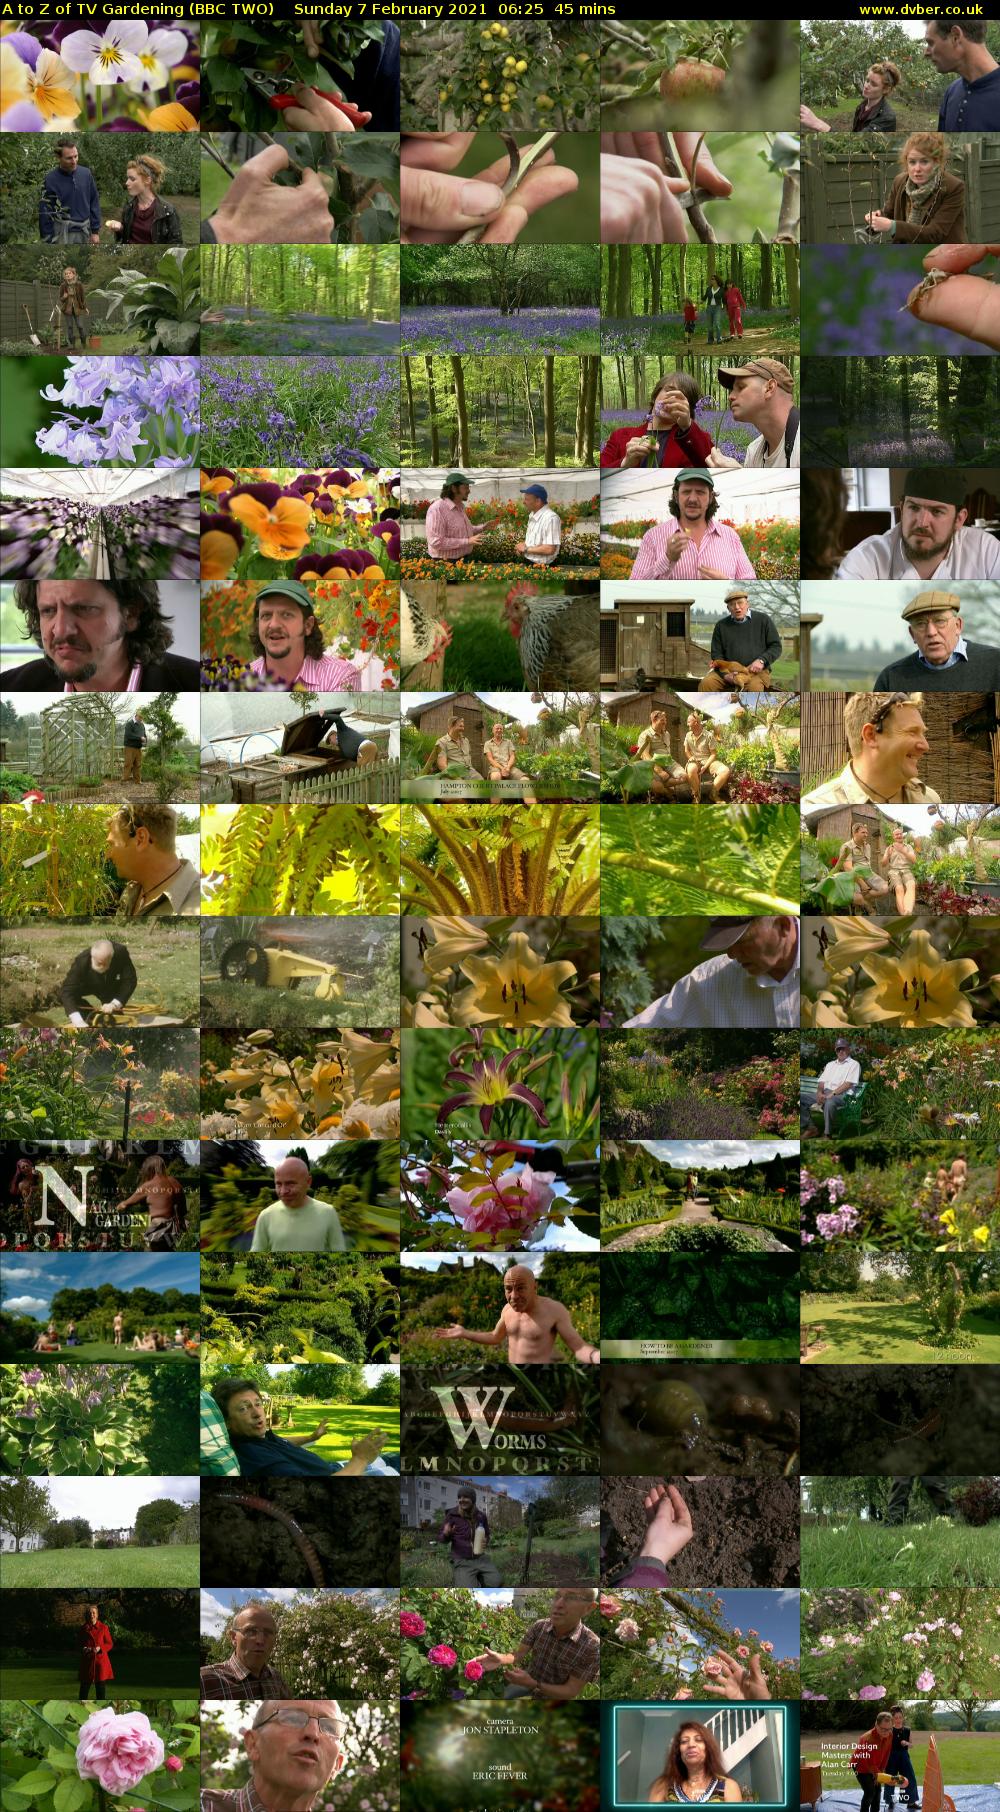 A to Z of TV Gardening (BBC TWO) Sunday 7 February 2021 06:25 - 07:10